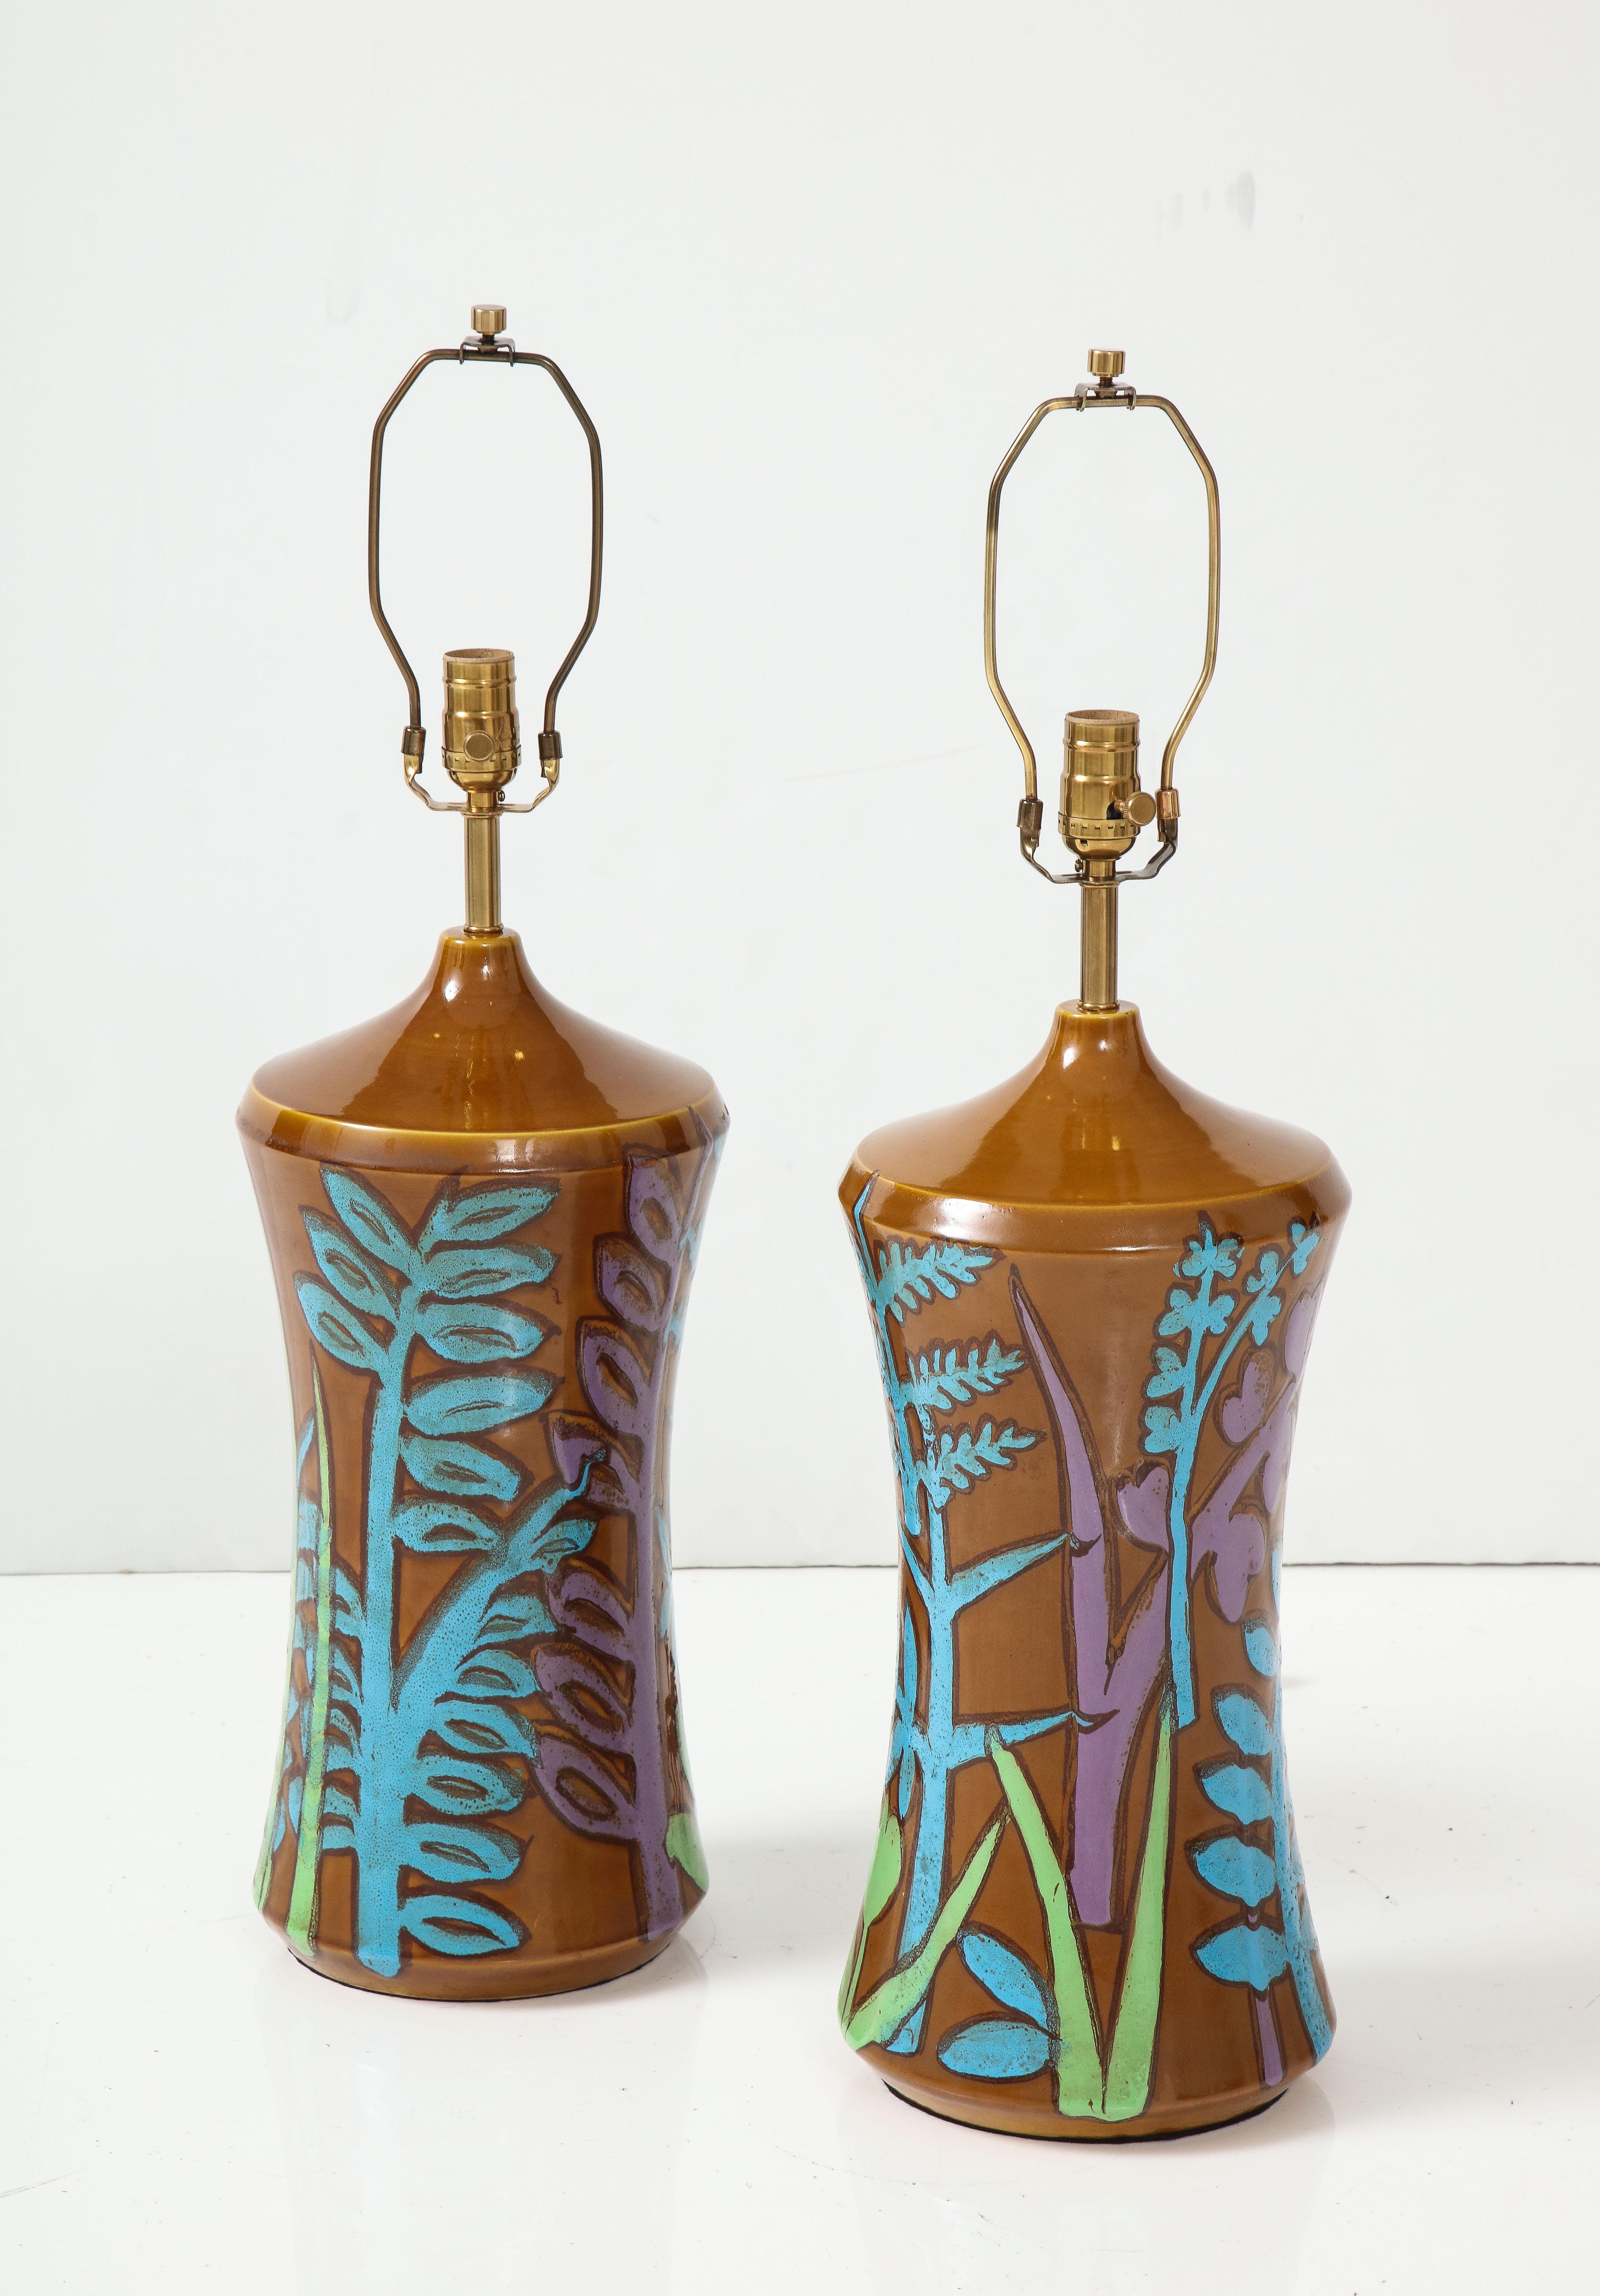 Pair of Italian hand decorated ceramic lamps feauring a light brown background and exhuberant stylized fauna and flowers in light blue, lilac, and celadon. Rewired for use in the USA with new brass sockets and silk cords. 100W max